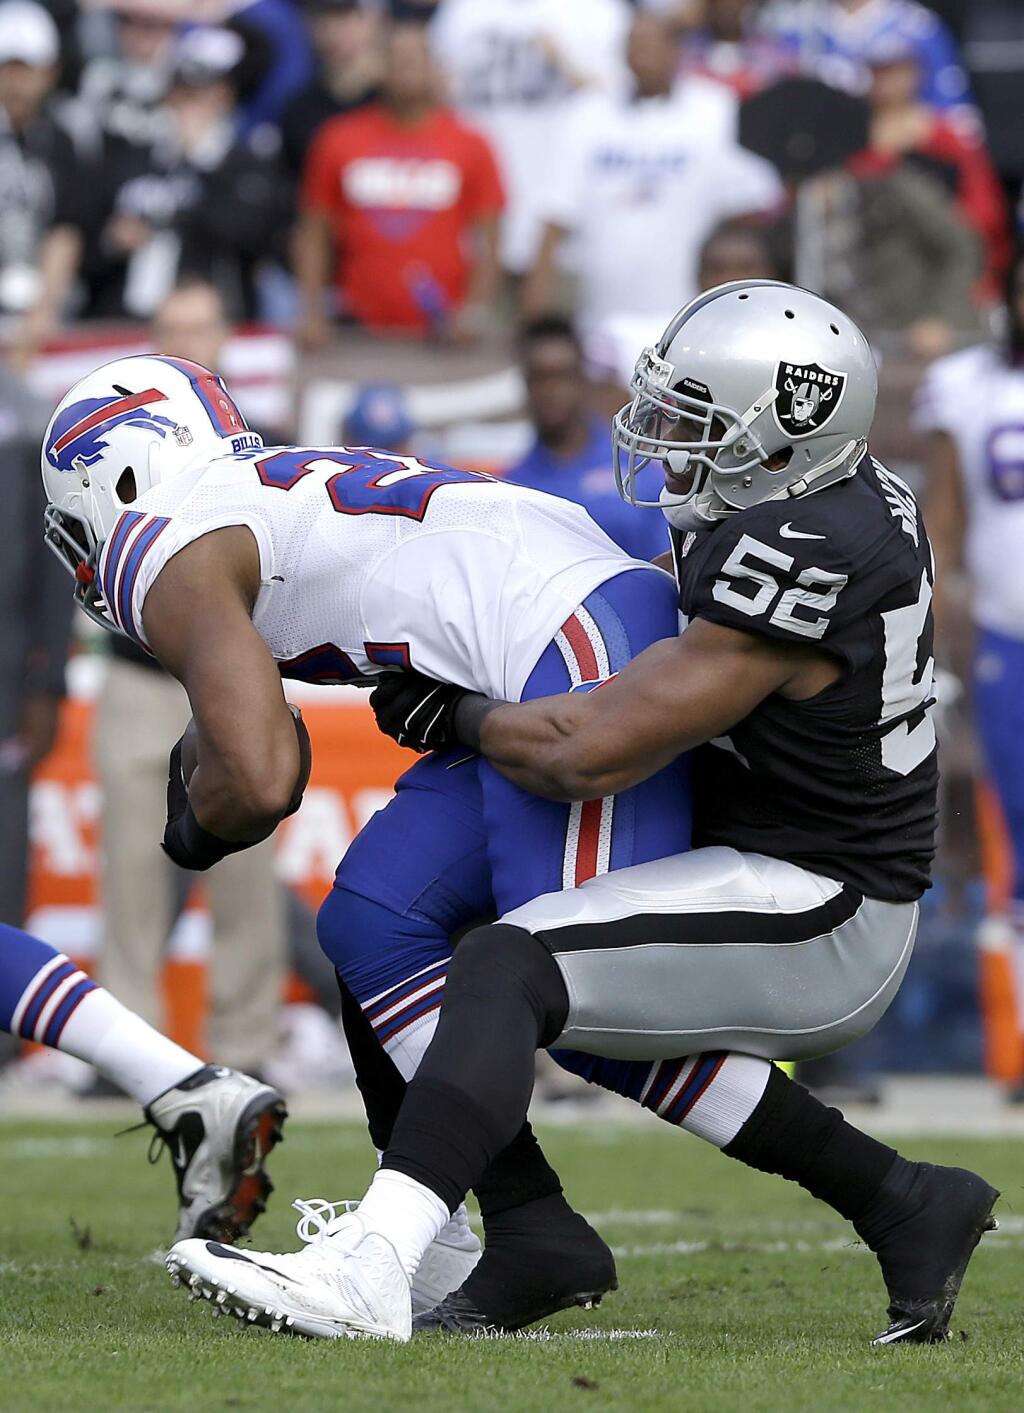 Oakland Raiders outside linebacker Khalil Mack (52) tackles Buffalo Bills running back Fred Jackson (22) during the first quarter of a game in Oakland, Sunday, Dec. 21, 2014. (AP Photo/Jeff Chiu)